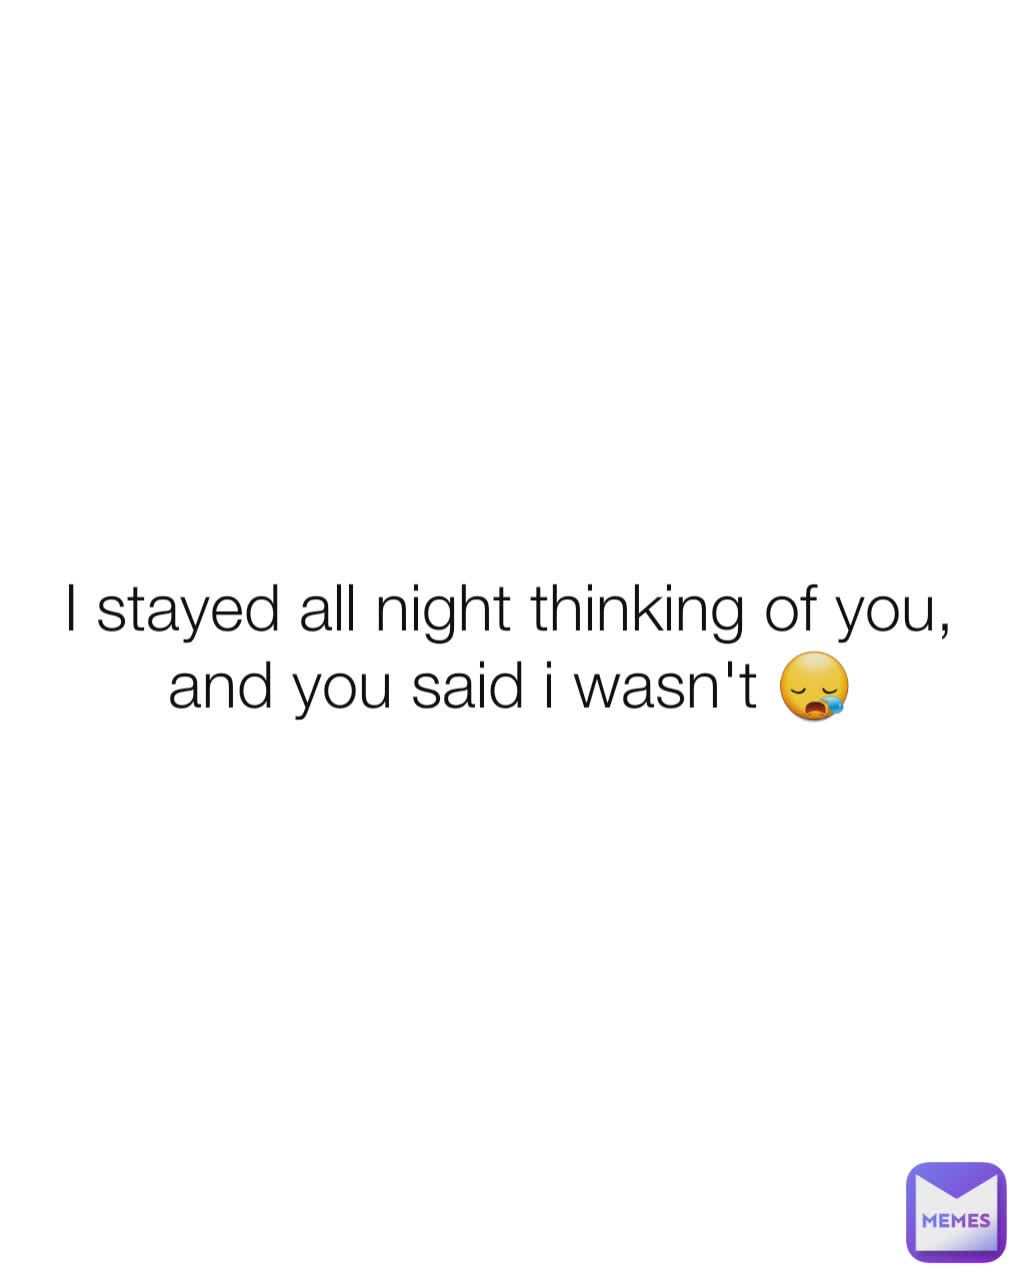 I stayed all night thinking of you, and you said i wasn't 😪